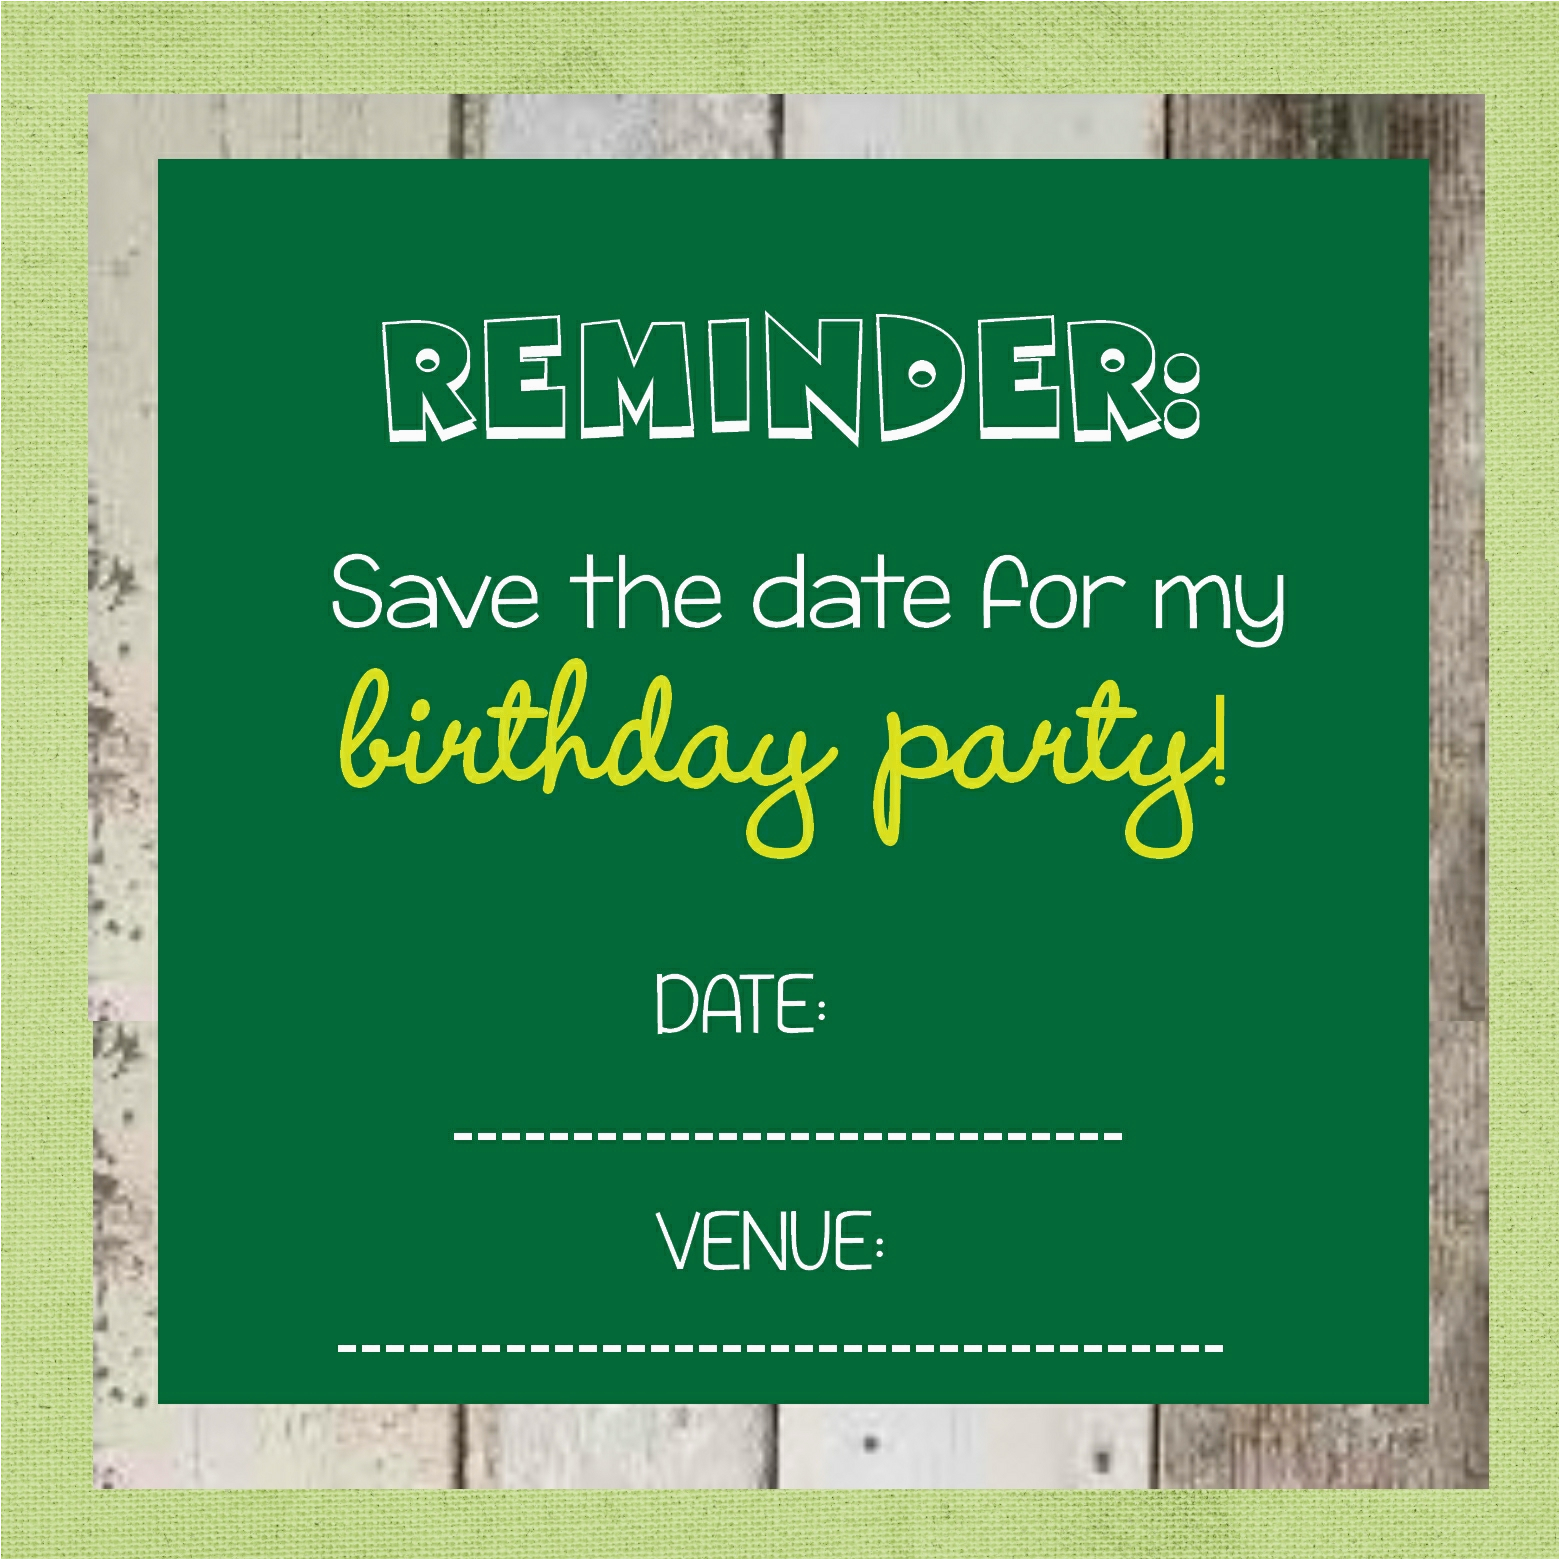 save-the-date-cards-for-birthday-party-save-the-date-templates-free